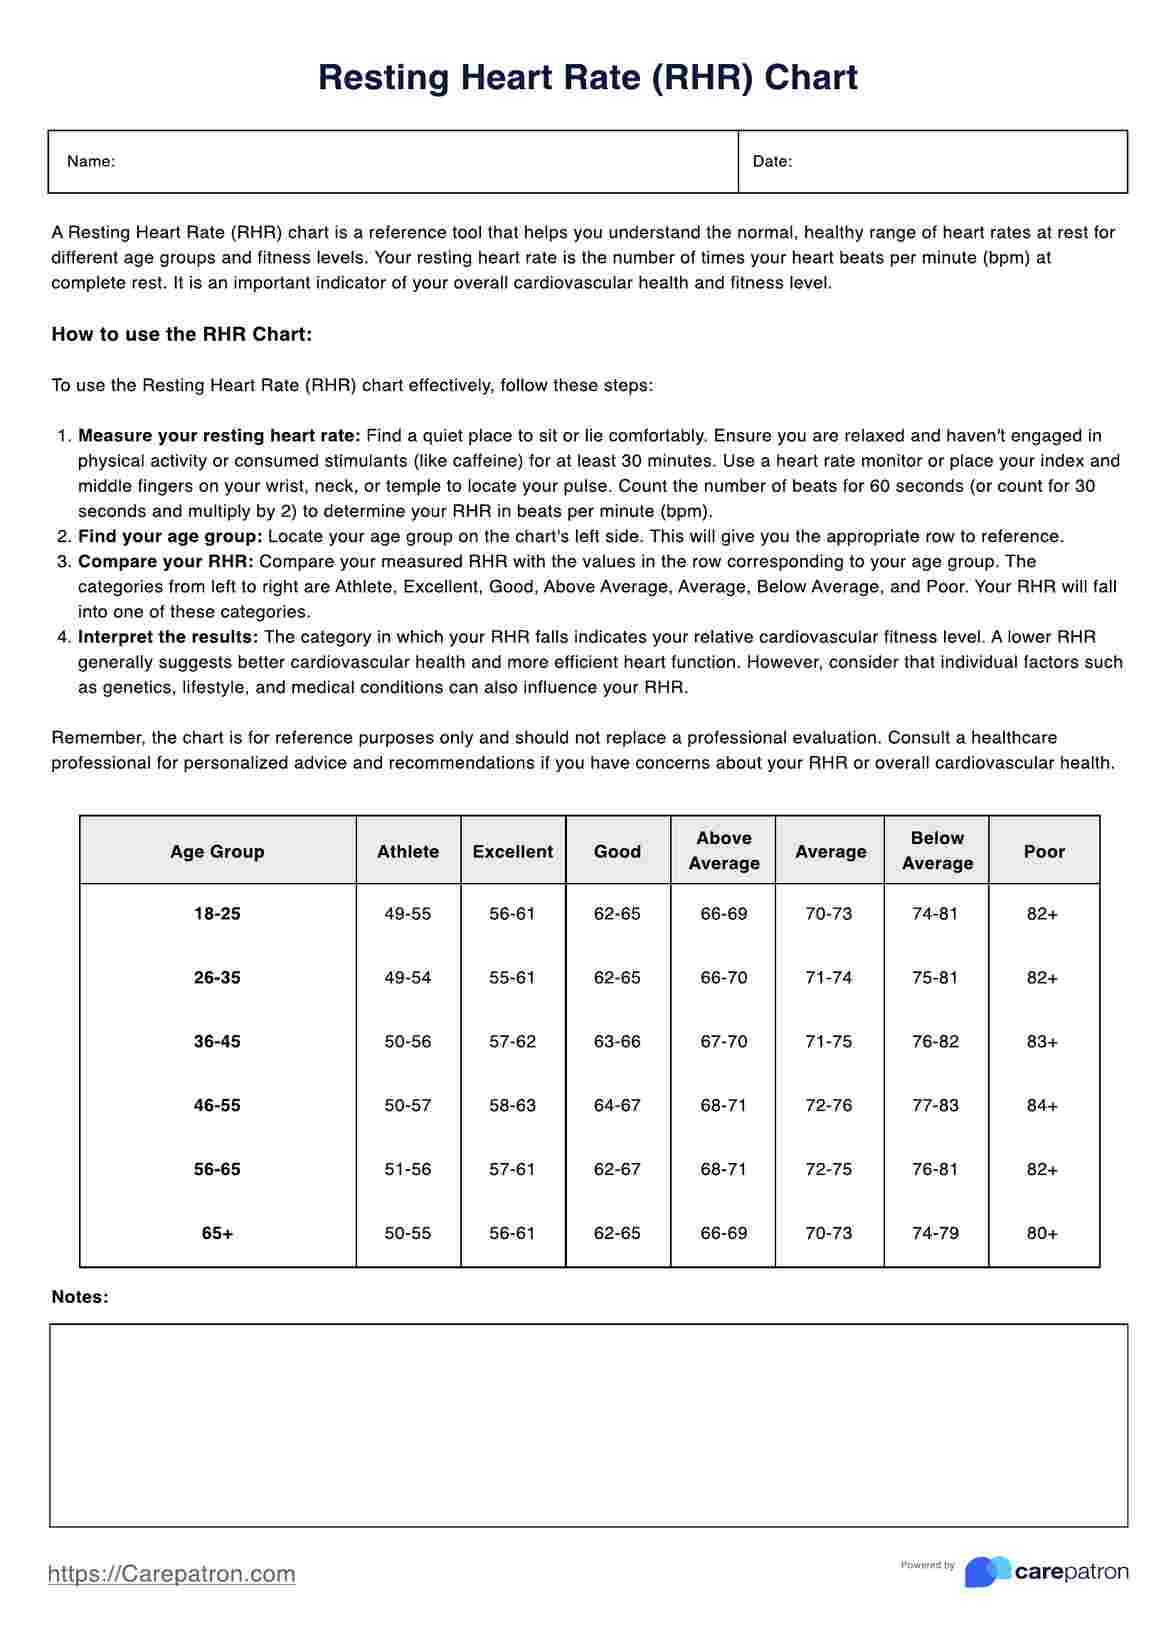 Resting Heart Rate Charts PDF Example